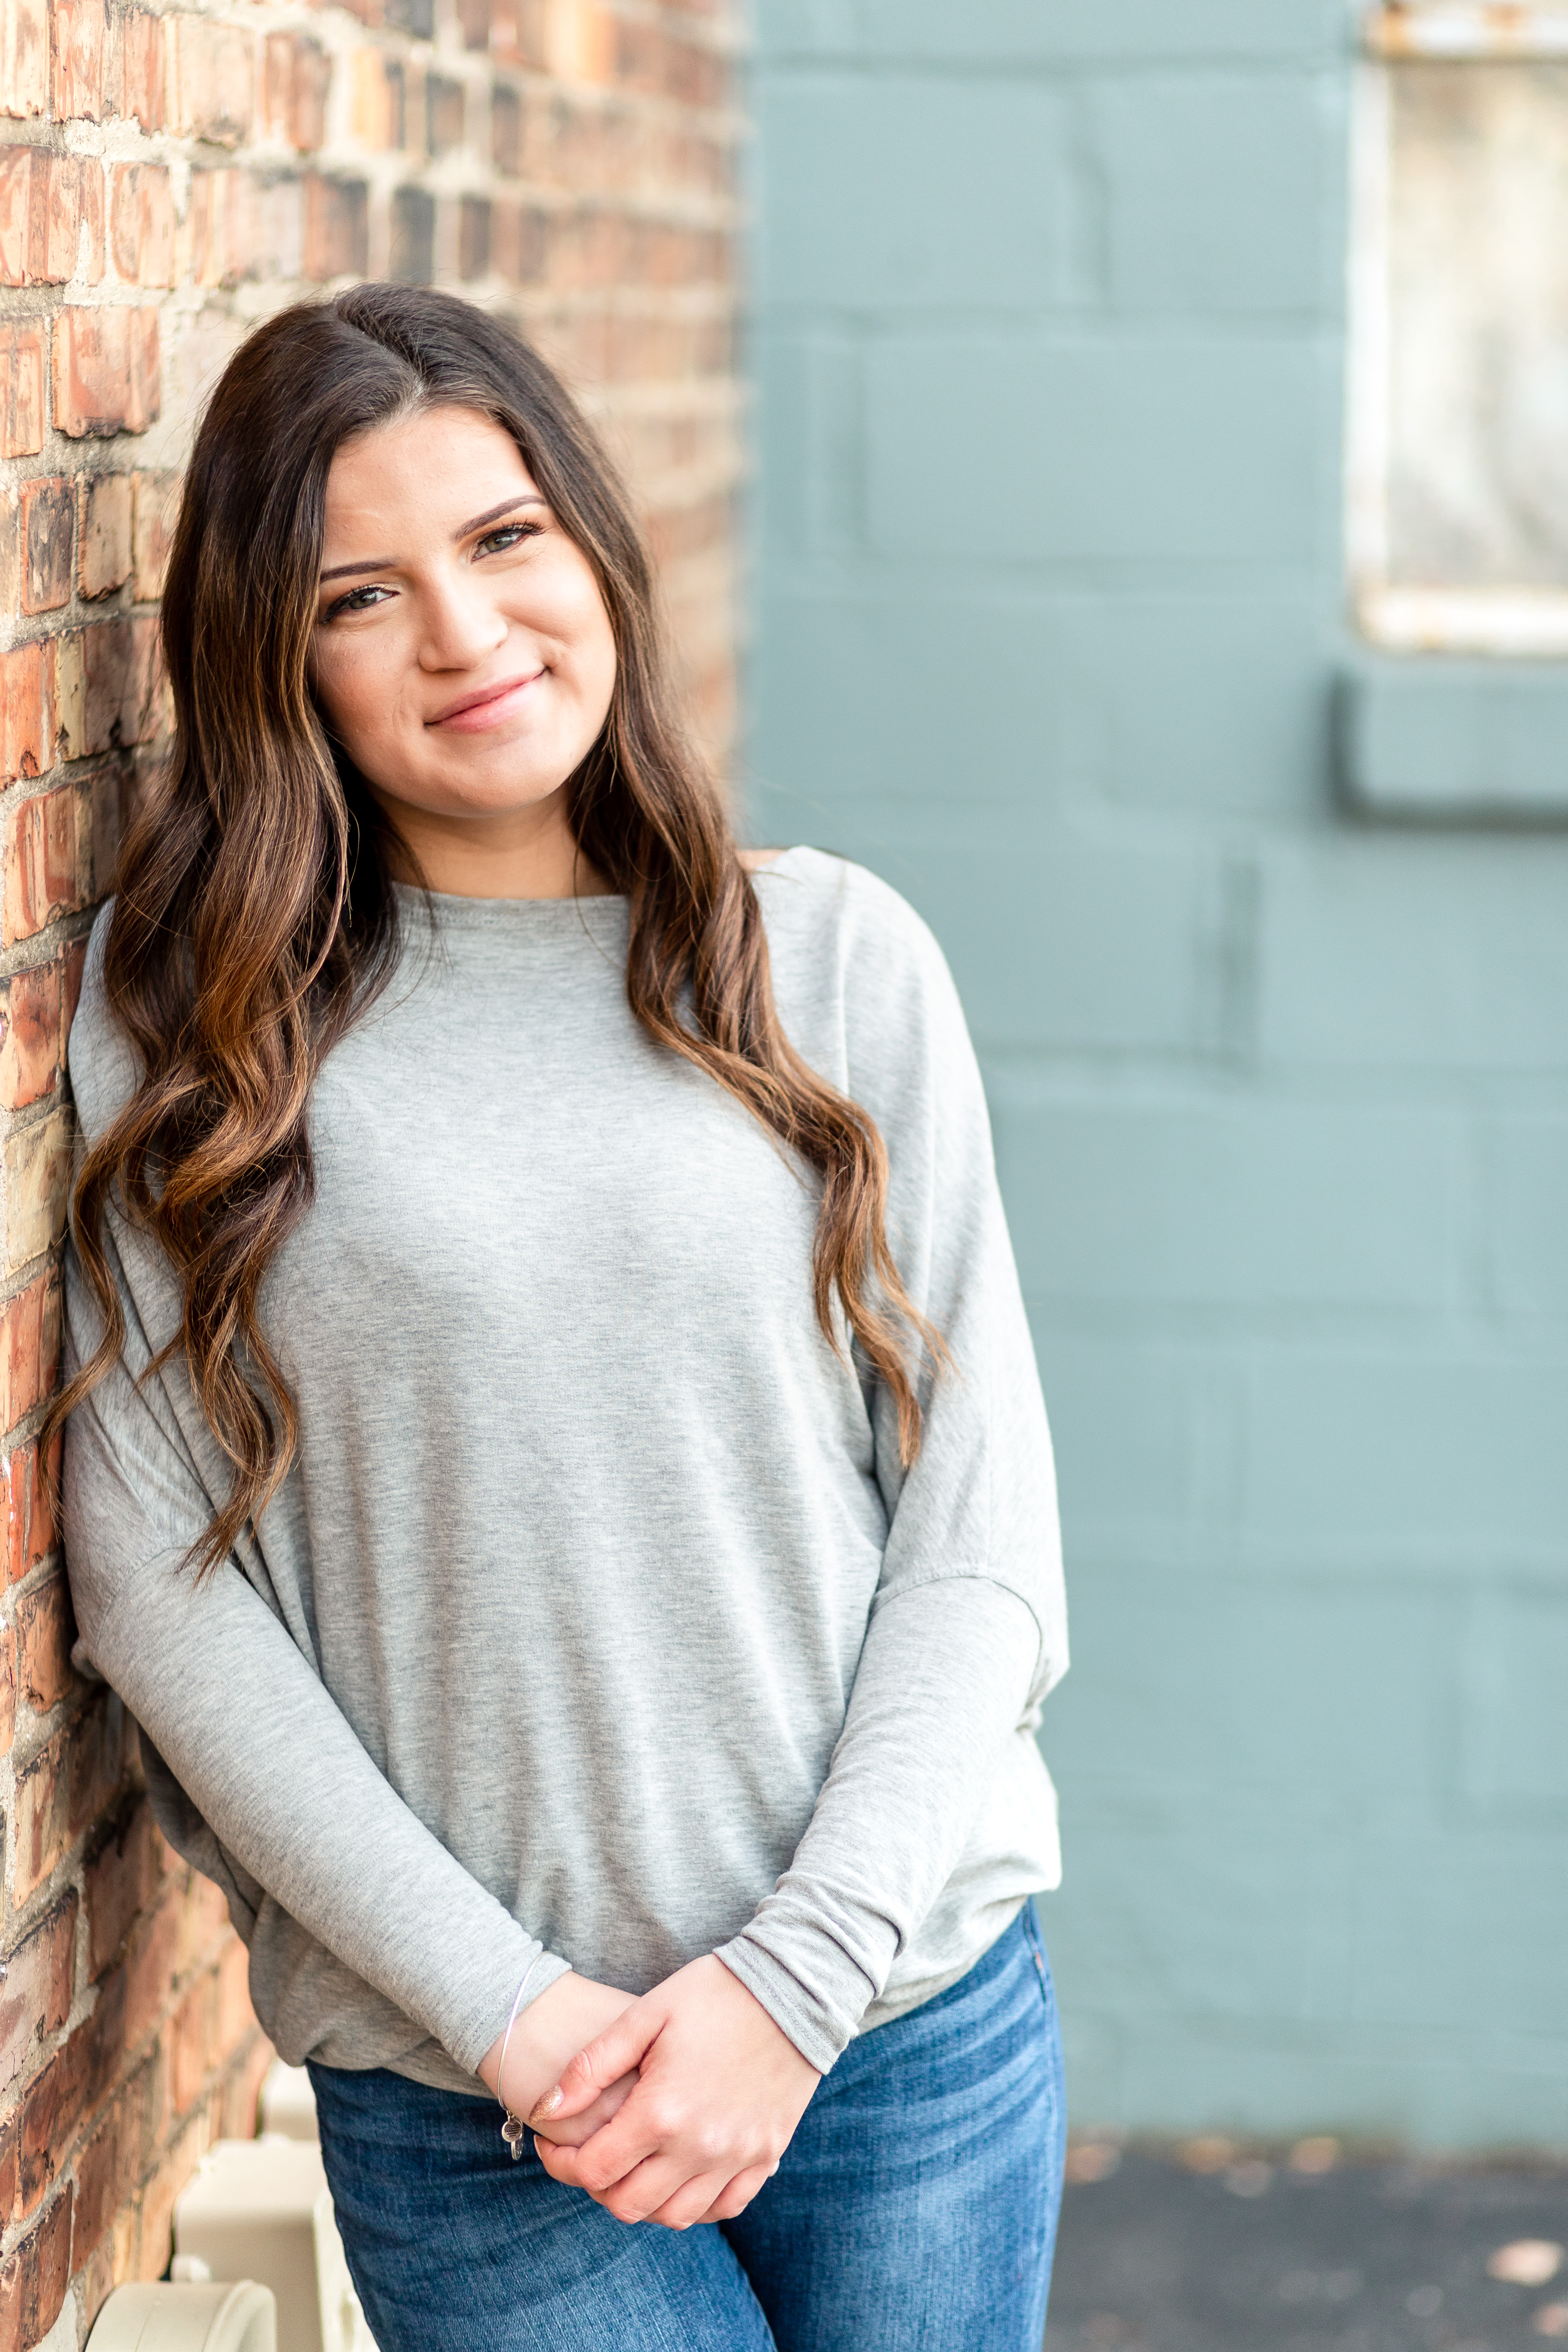 Winter-Senior-Portraits-Downtown-Frankfort-Illinois-Best-Illinois-Senior-Portrait-Photographers-What-to-wear-for-senior-pictures